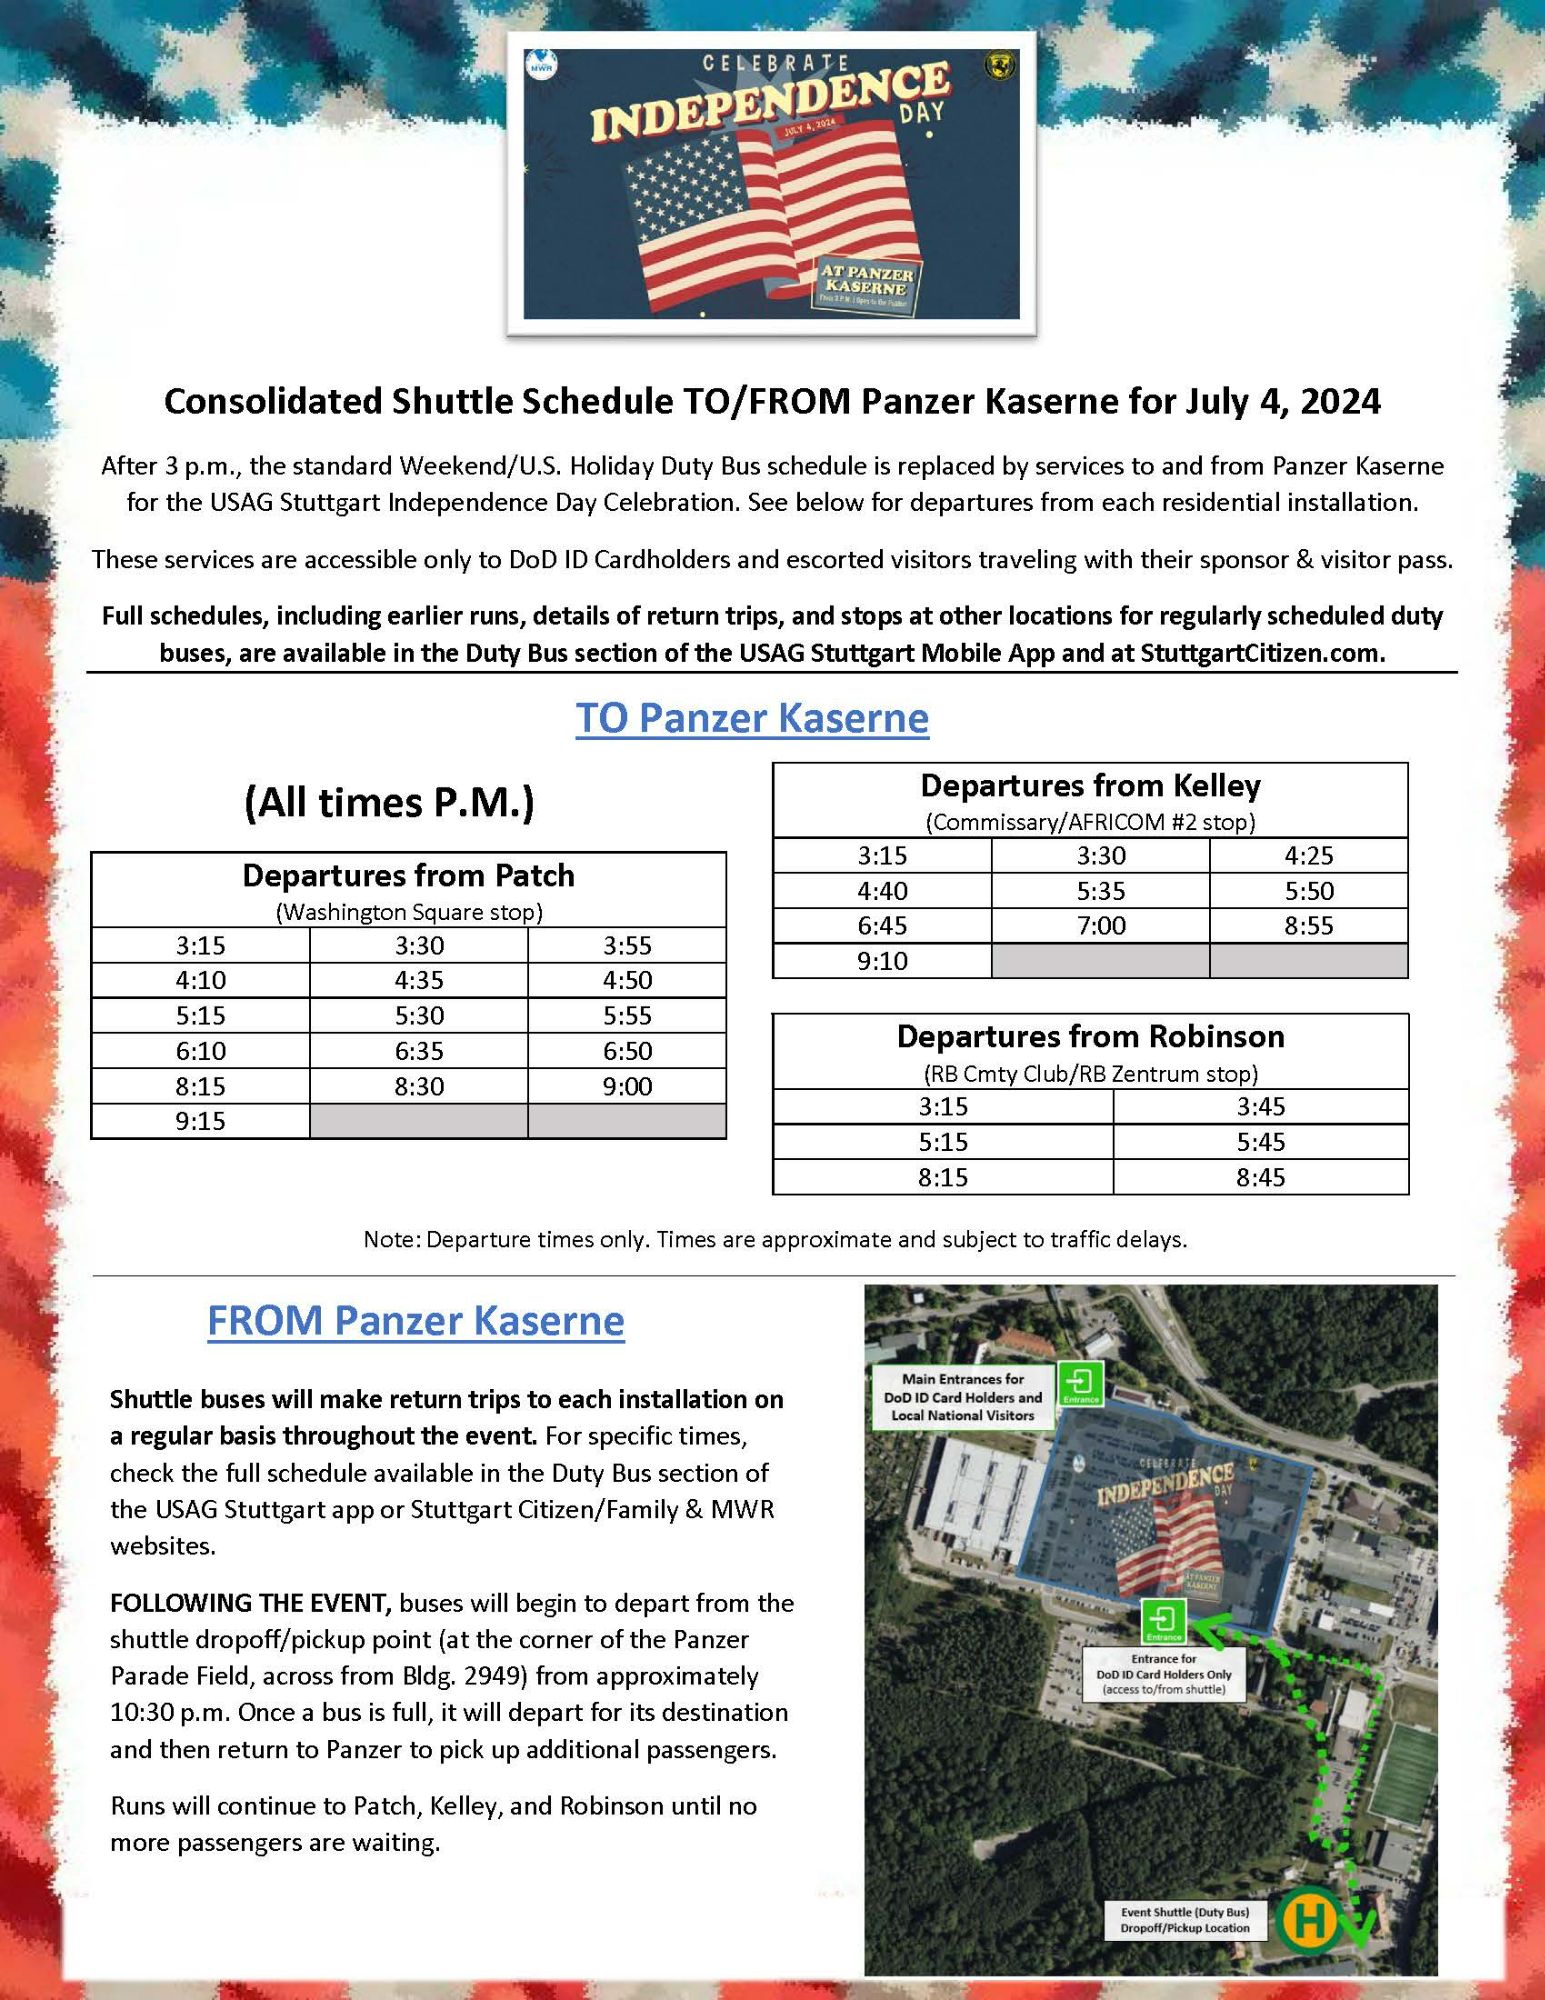 Consolidated Shuttle Bus Schedule - July 4 2024.jpg